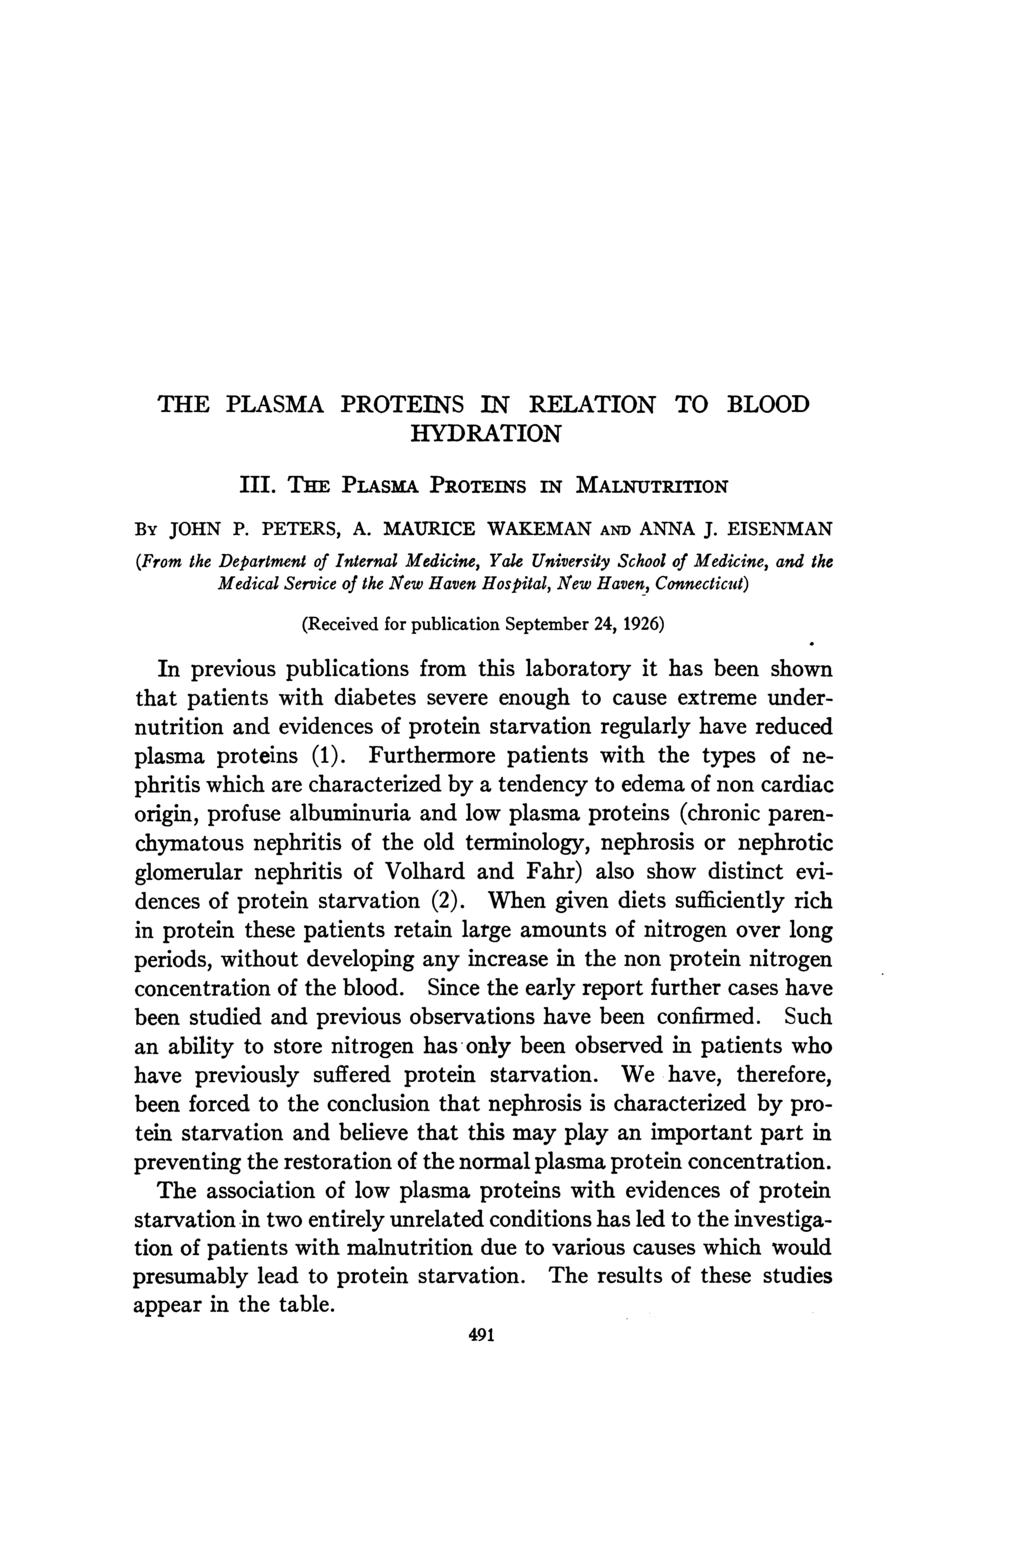 THE PLASMA PROTEINS IN RELATION TO BLOOD HYDRATION III. THE PLASmA PROTEINS IN MALNUTRITION By JOHN P. PETERS, A. MAURICE WAKEMAN AND ANNA J.